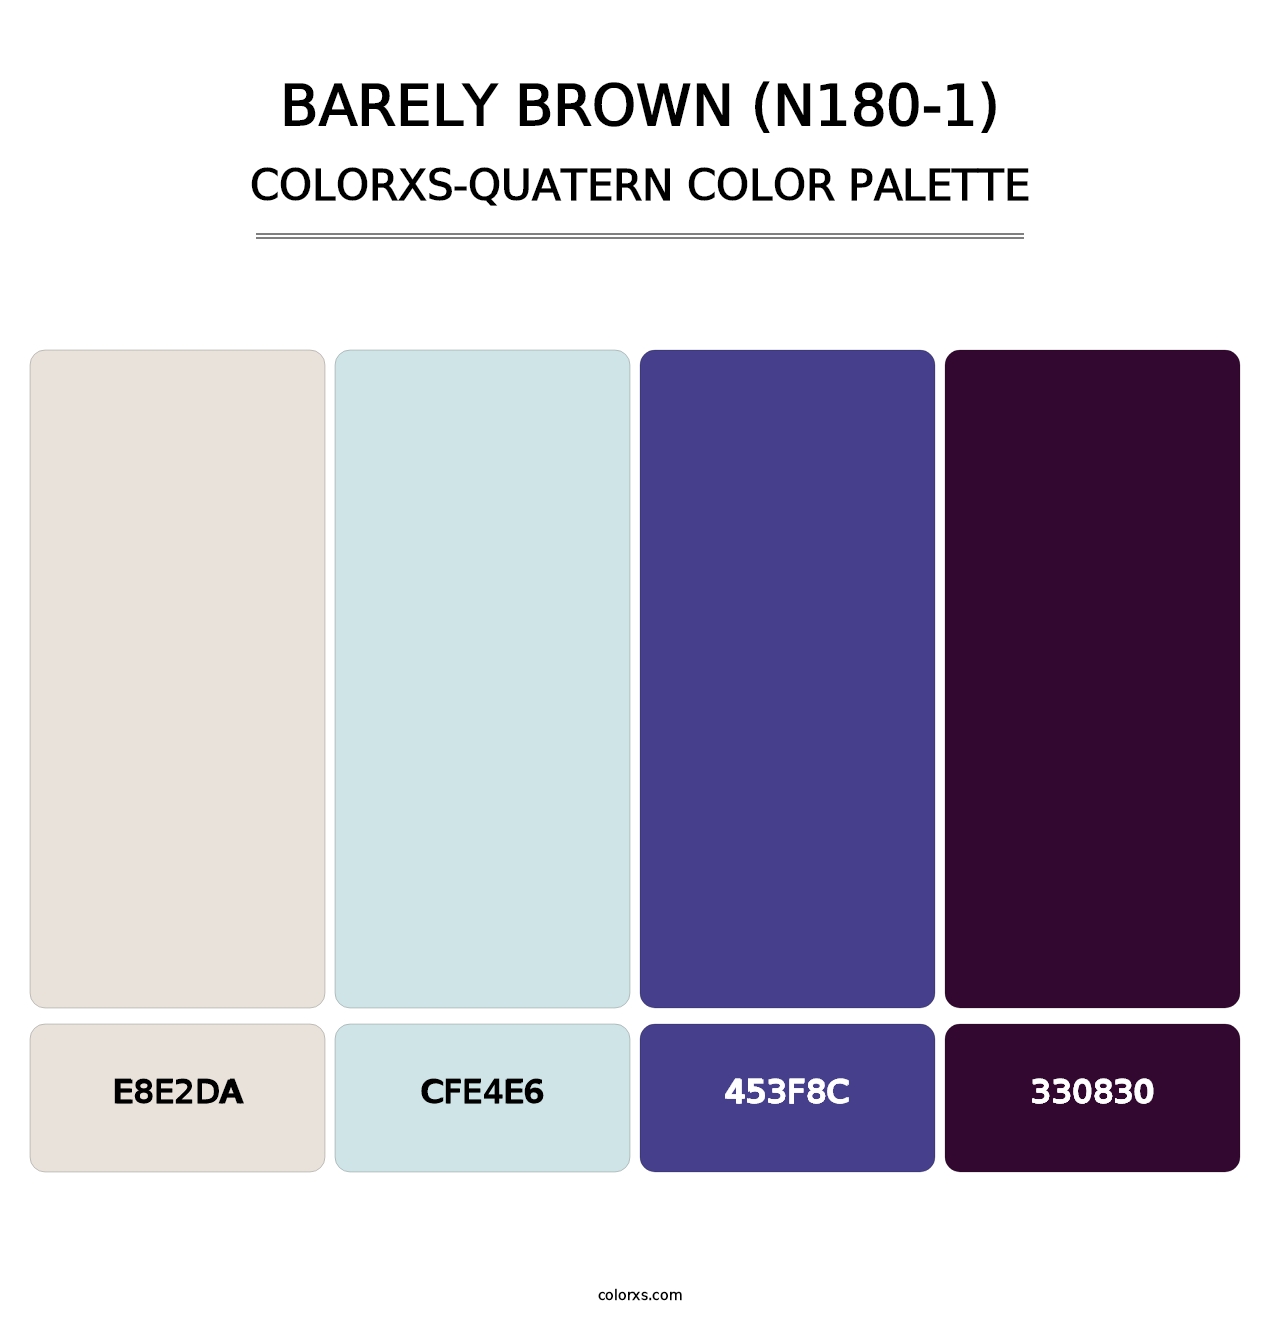 Barely Brown (N180-1) - Colorxs Quatern Palette